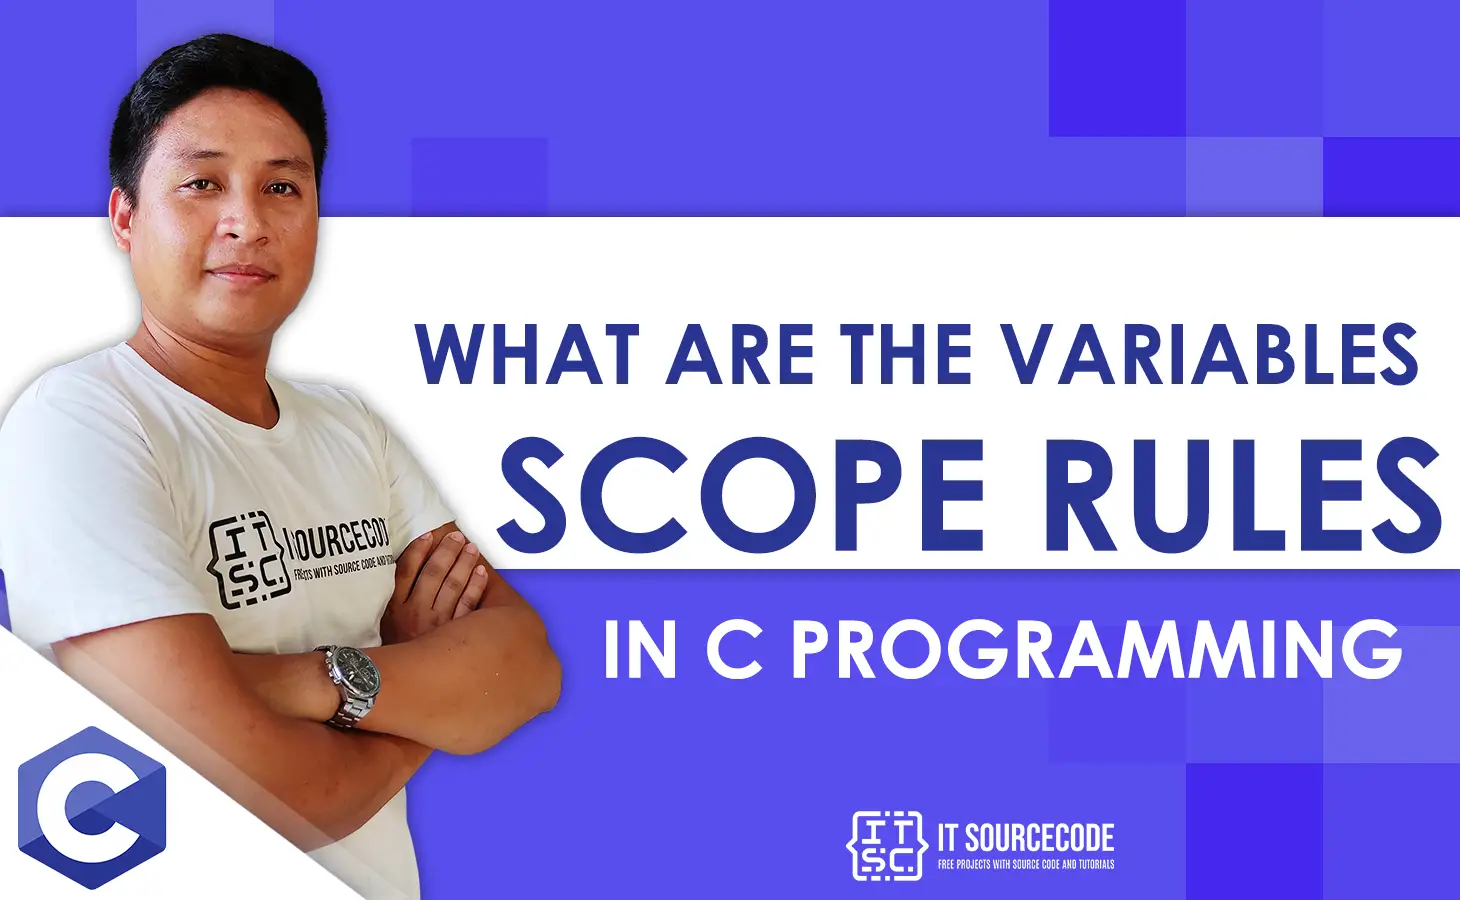 What are the Variables Scope Rules in C Programming